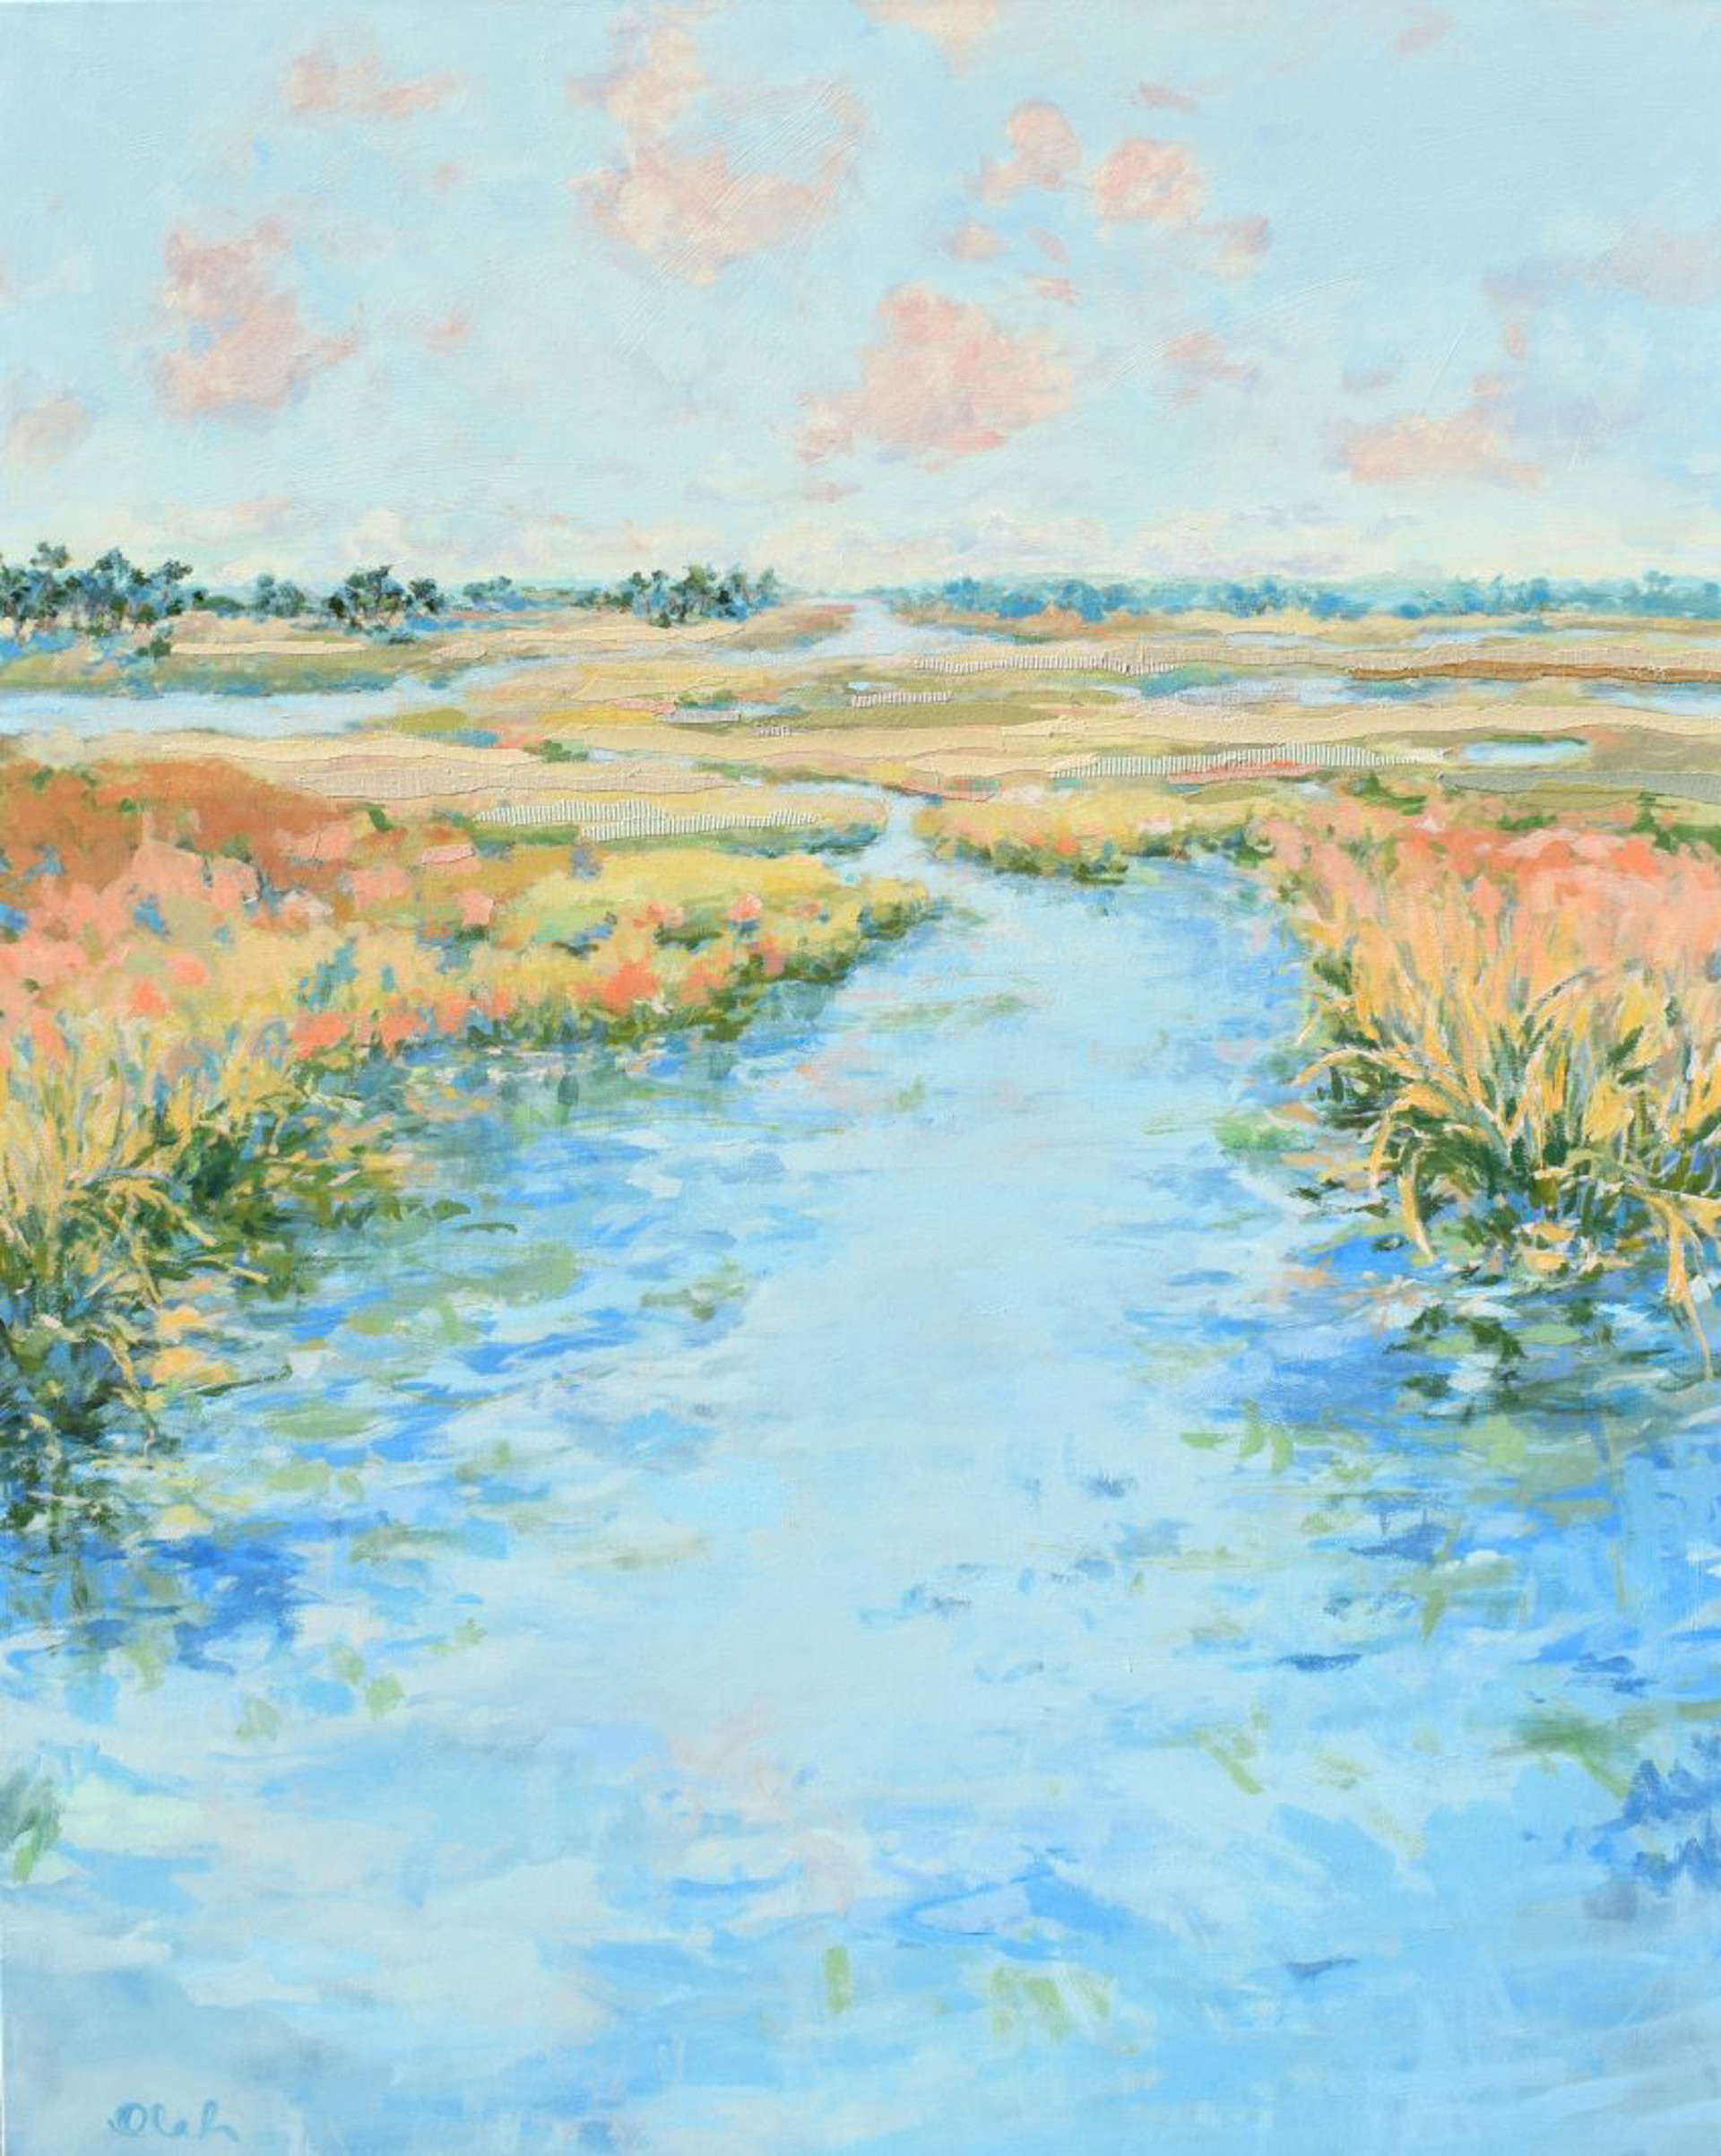 In Love with the Low Country 2 by Karin Olah